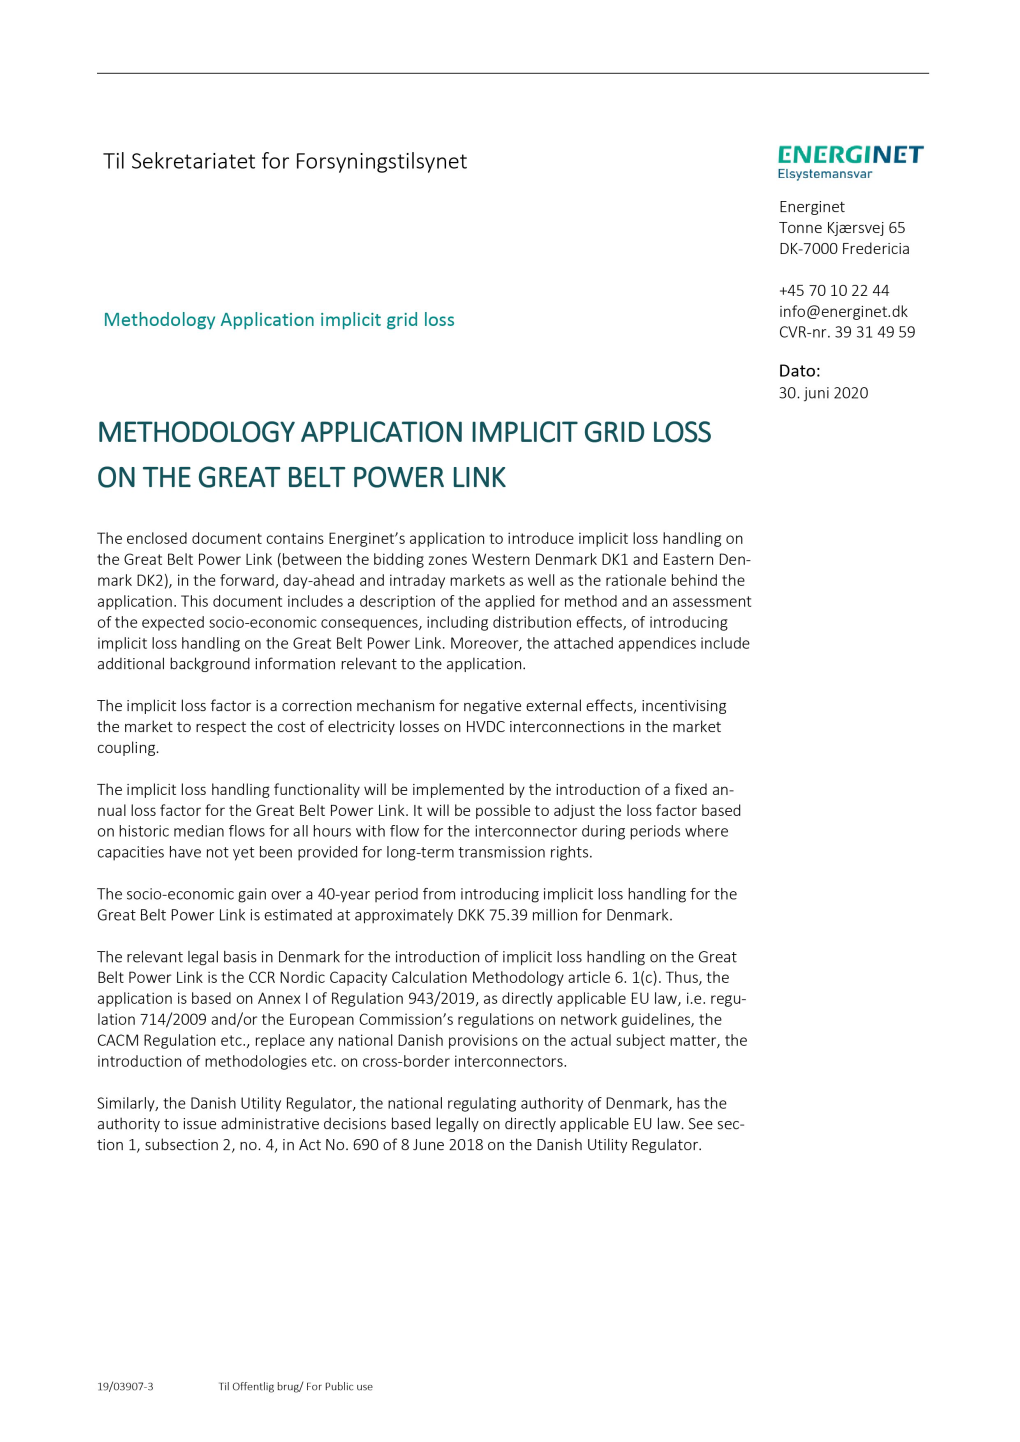 Methodology Application Implicit Grid Loss on The